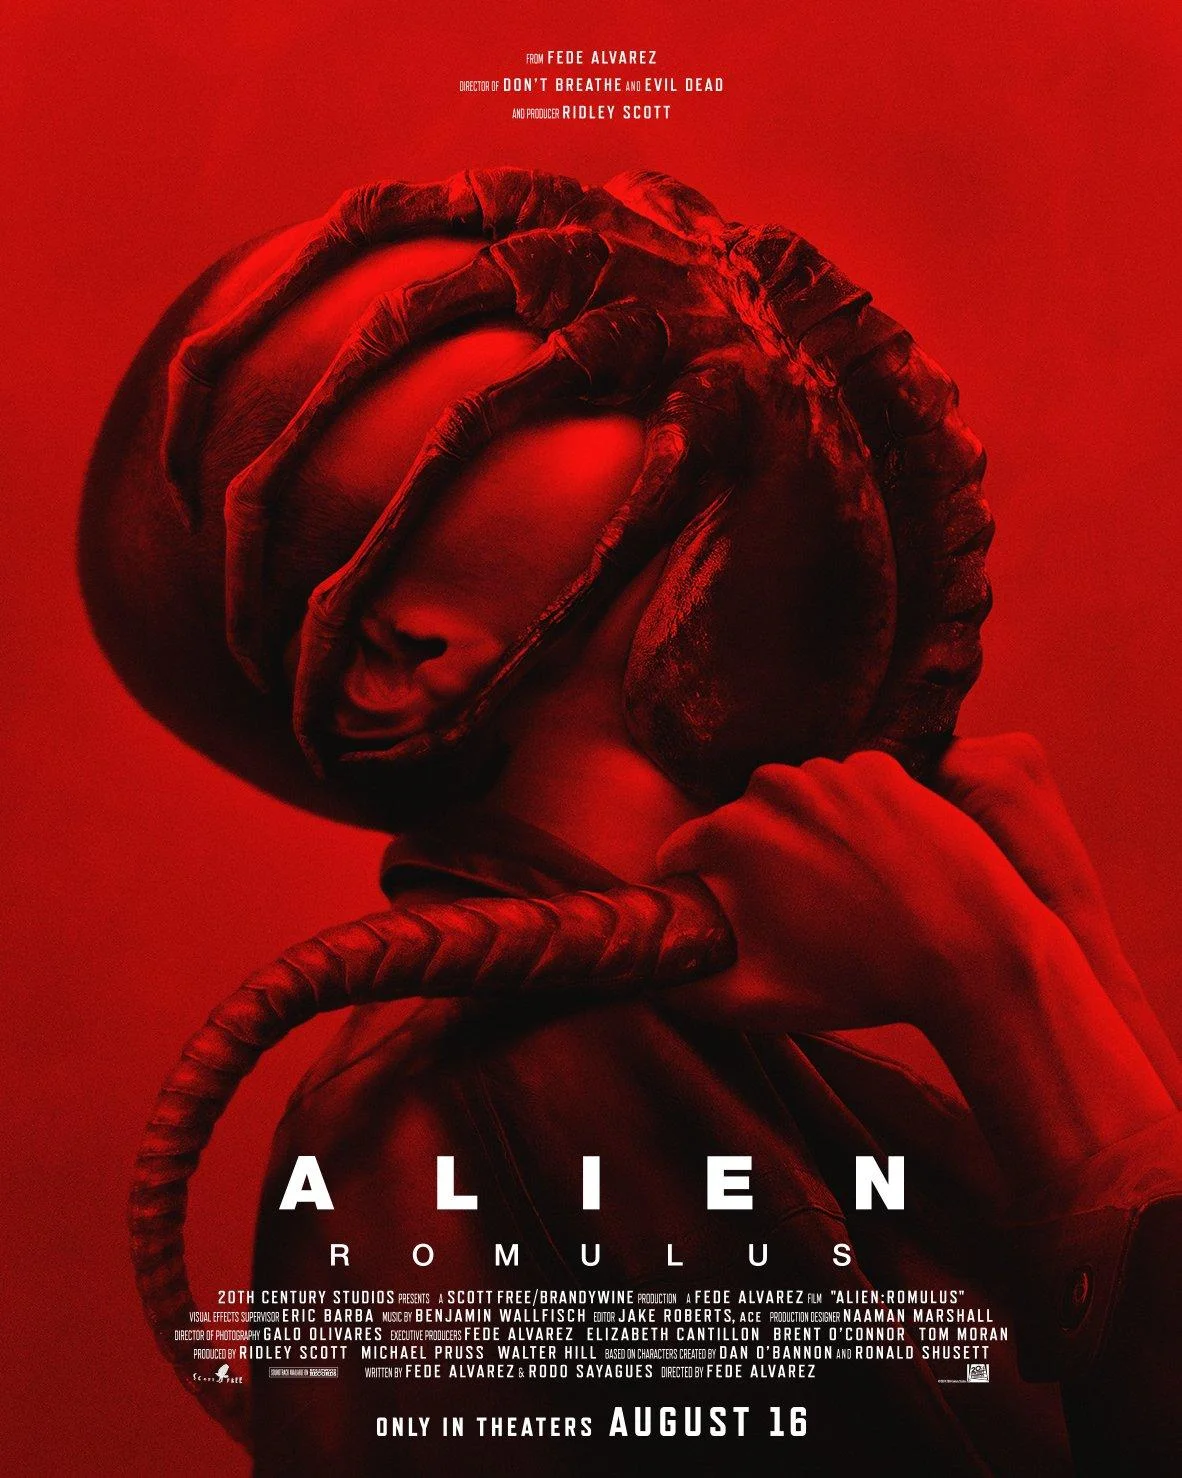 Face-hugger holds suffocating grip in new Poster for Alien: Romulus